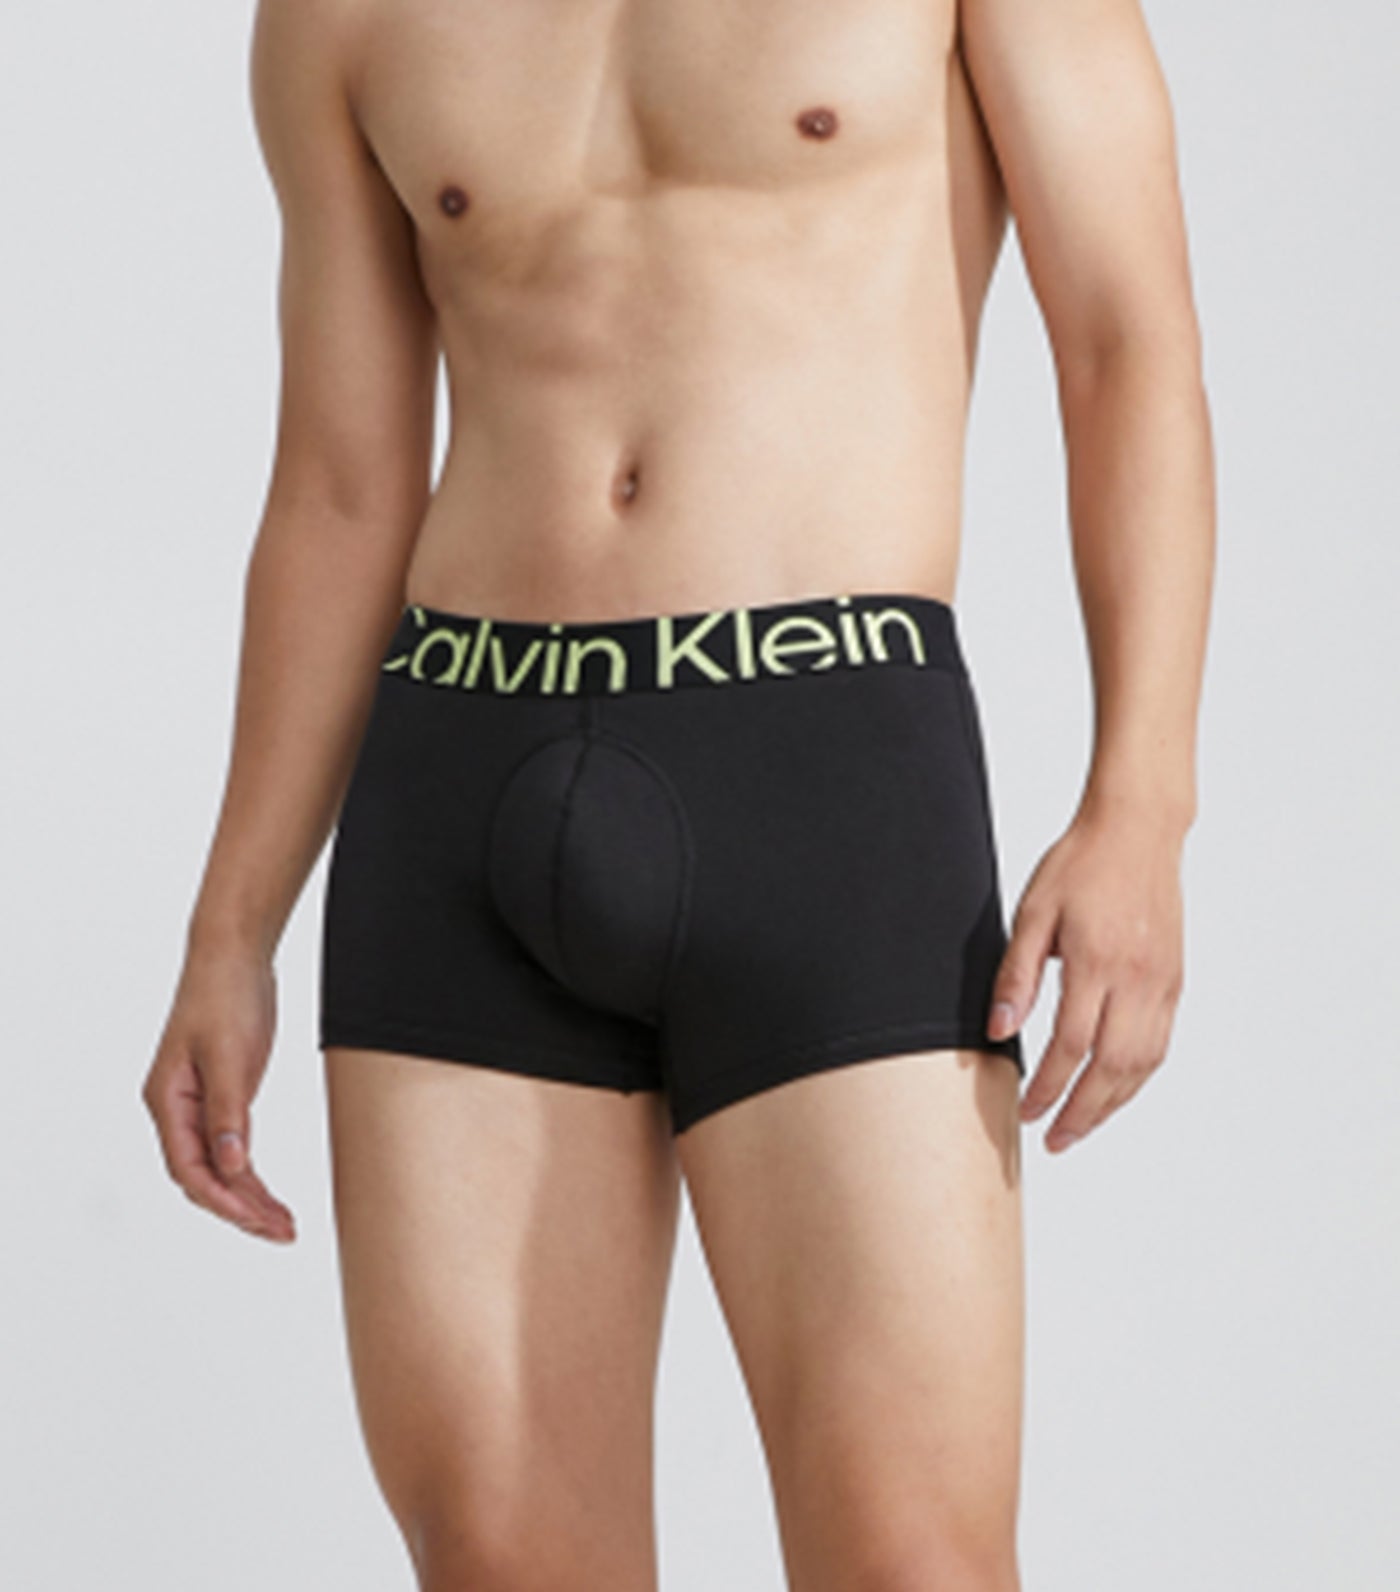 Calvin Klein Future Shift low rise trunk in charcoal gray